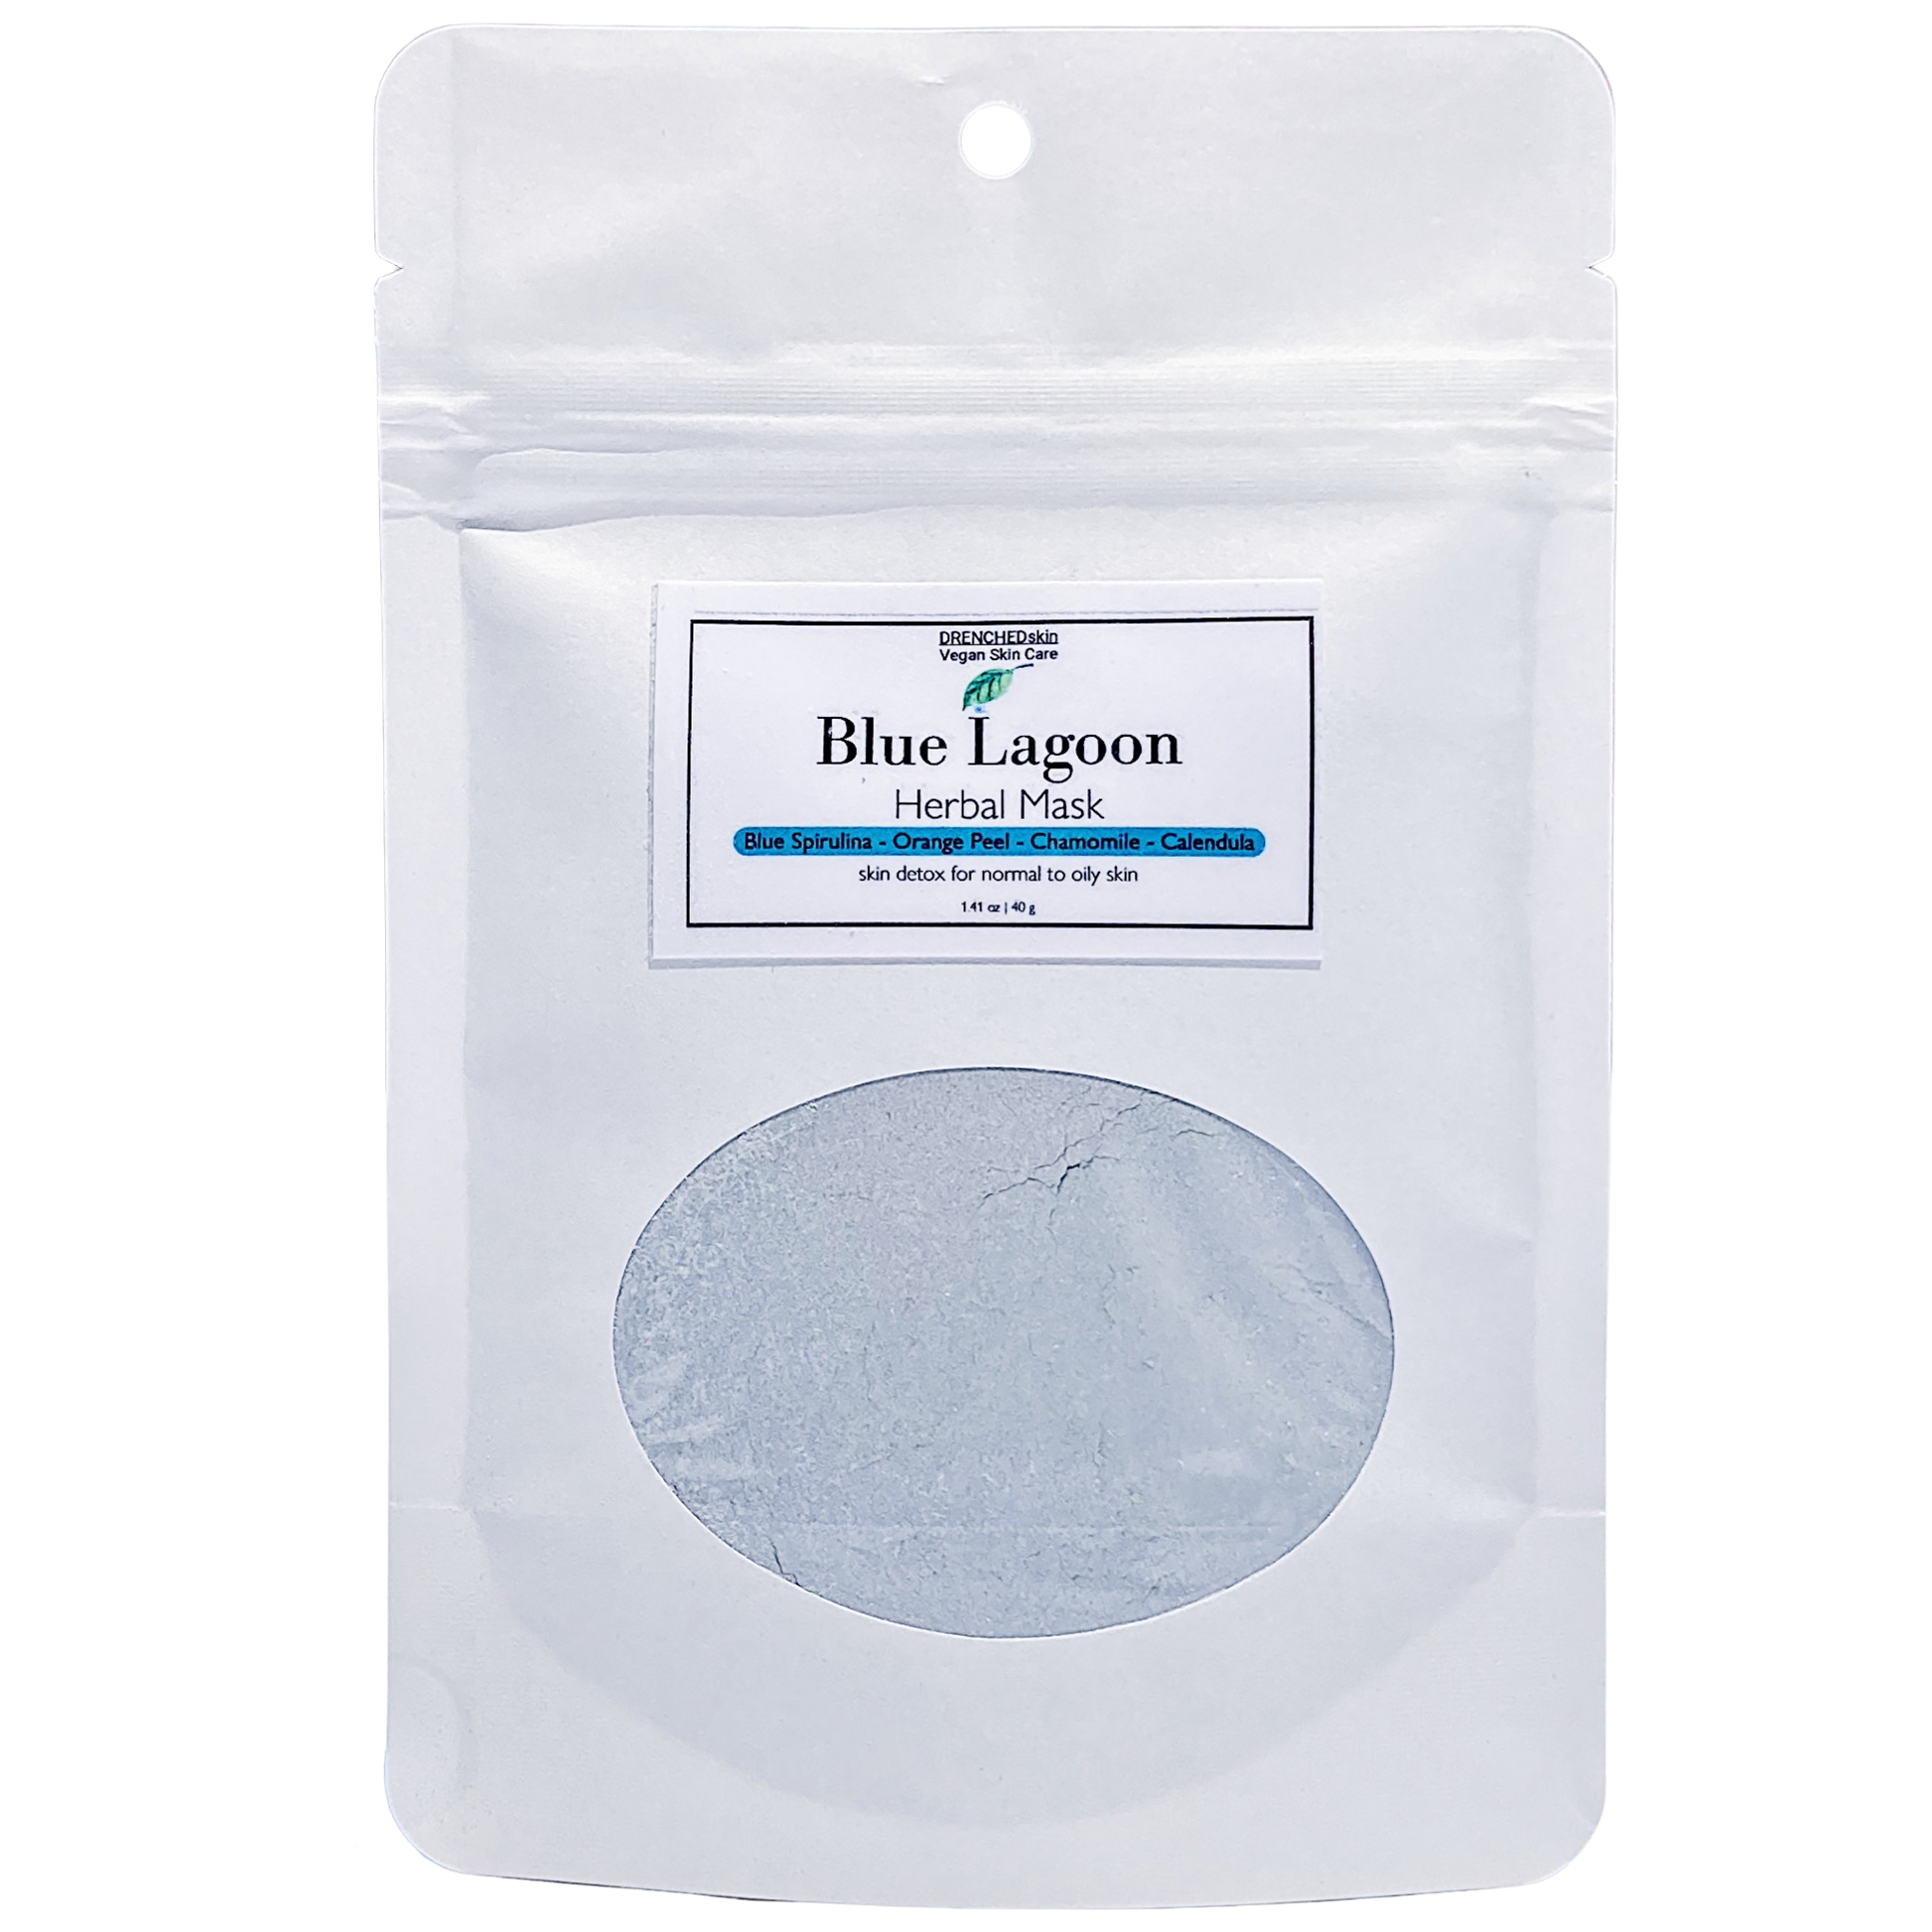 BLUE LAGOON Herbal Face Mask - DRENCHEDskin®